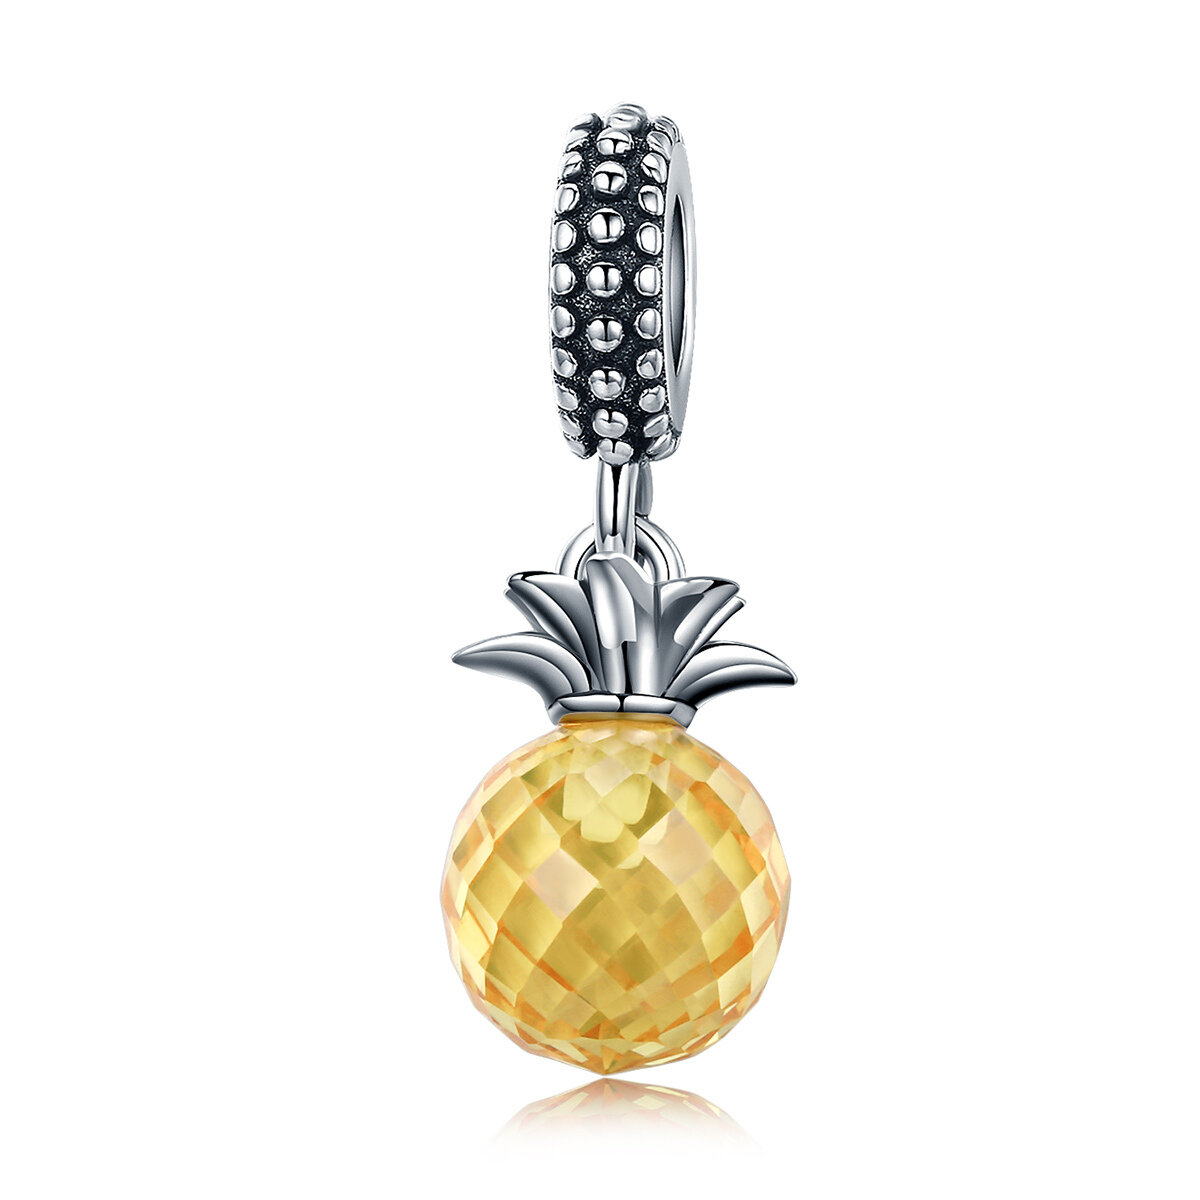 GemKing SCC150 Love of Pineapple  S925 Sterling Silver Charm